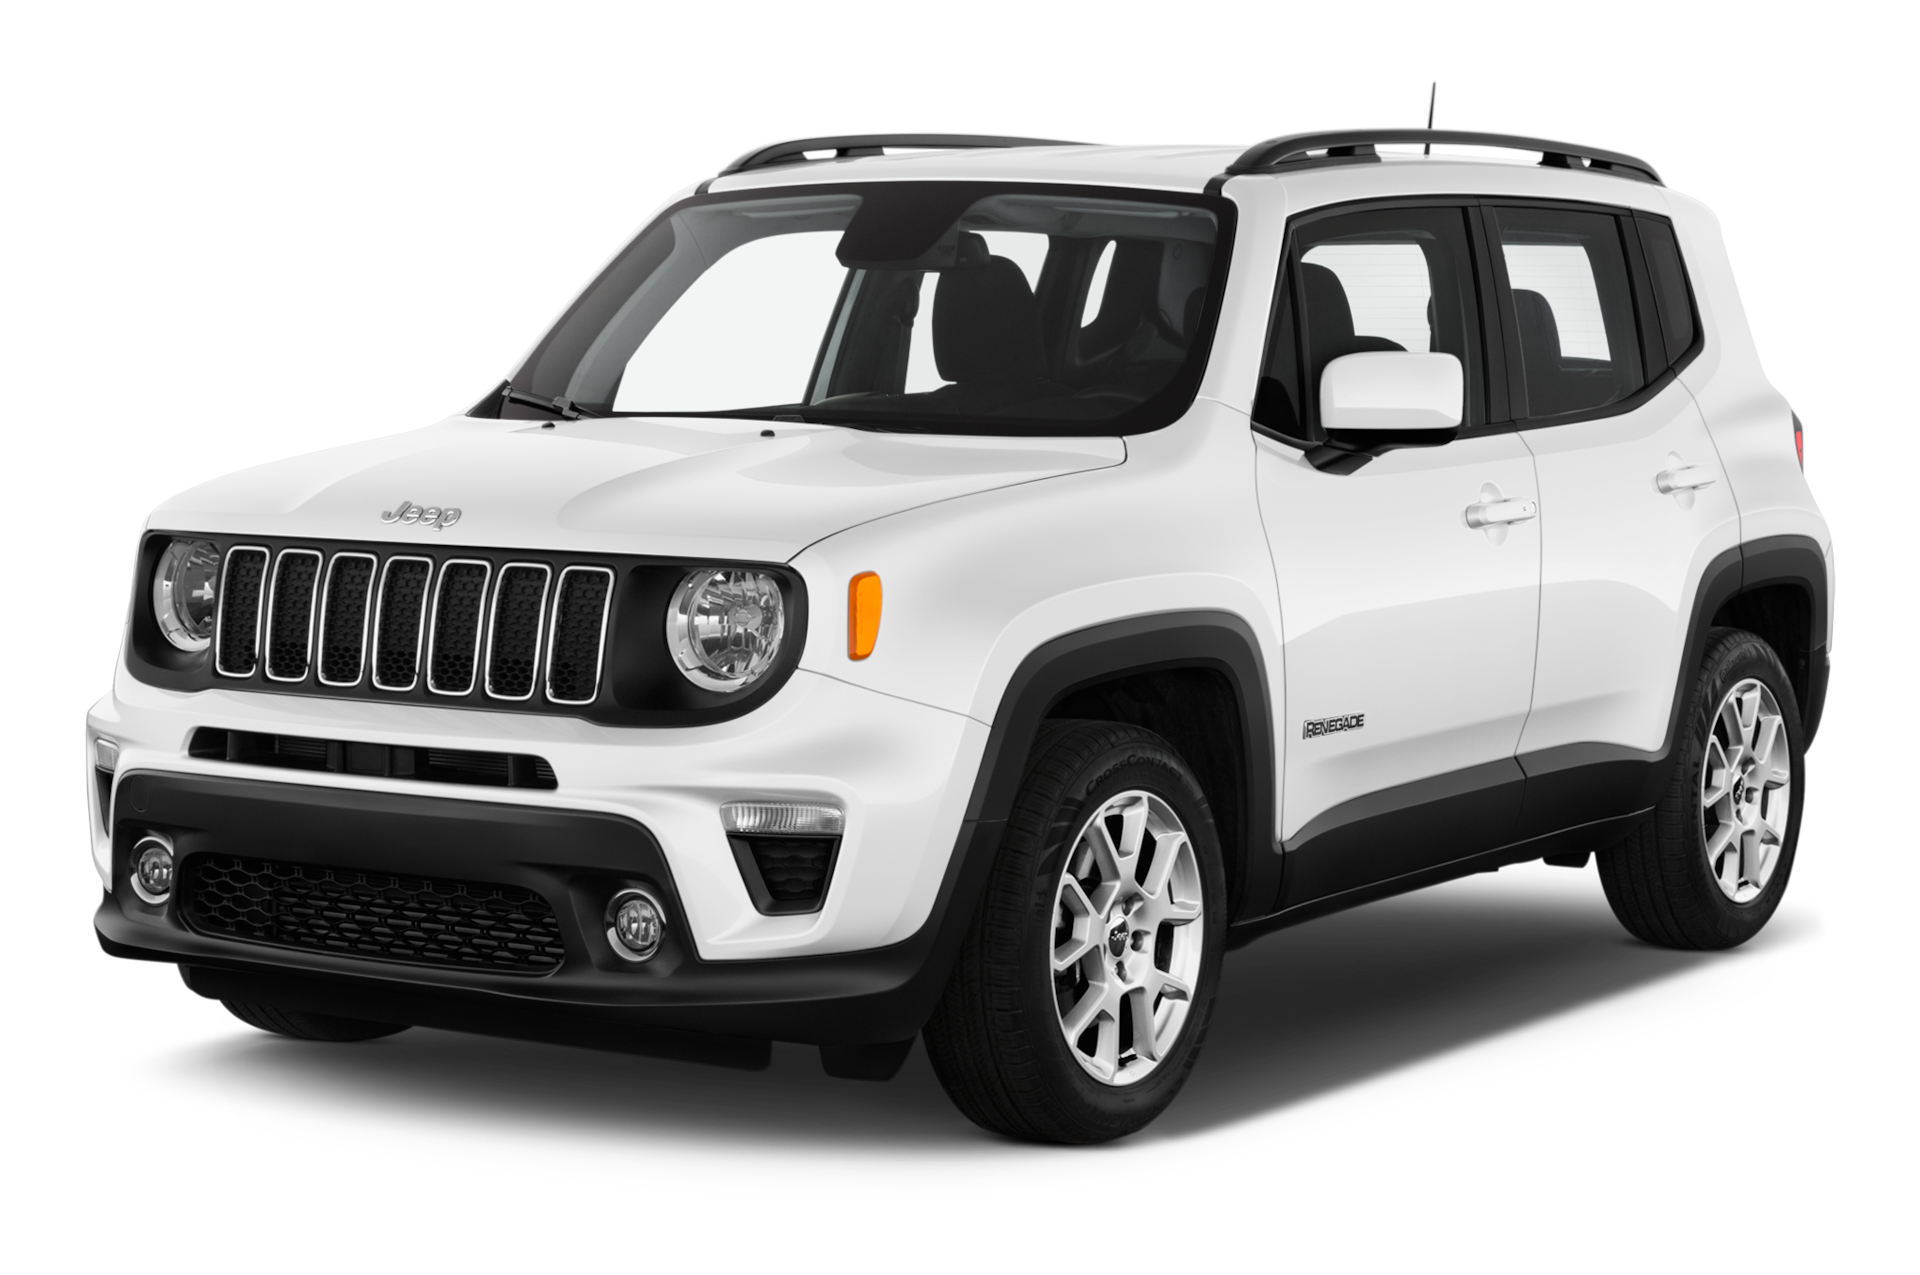 2021 Jeep Renegade Prices, Reviews, and Photos - MotorTrend